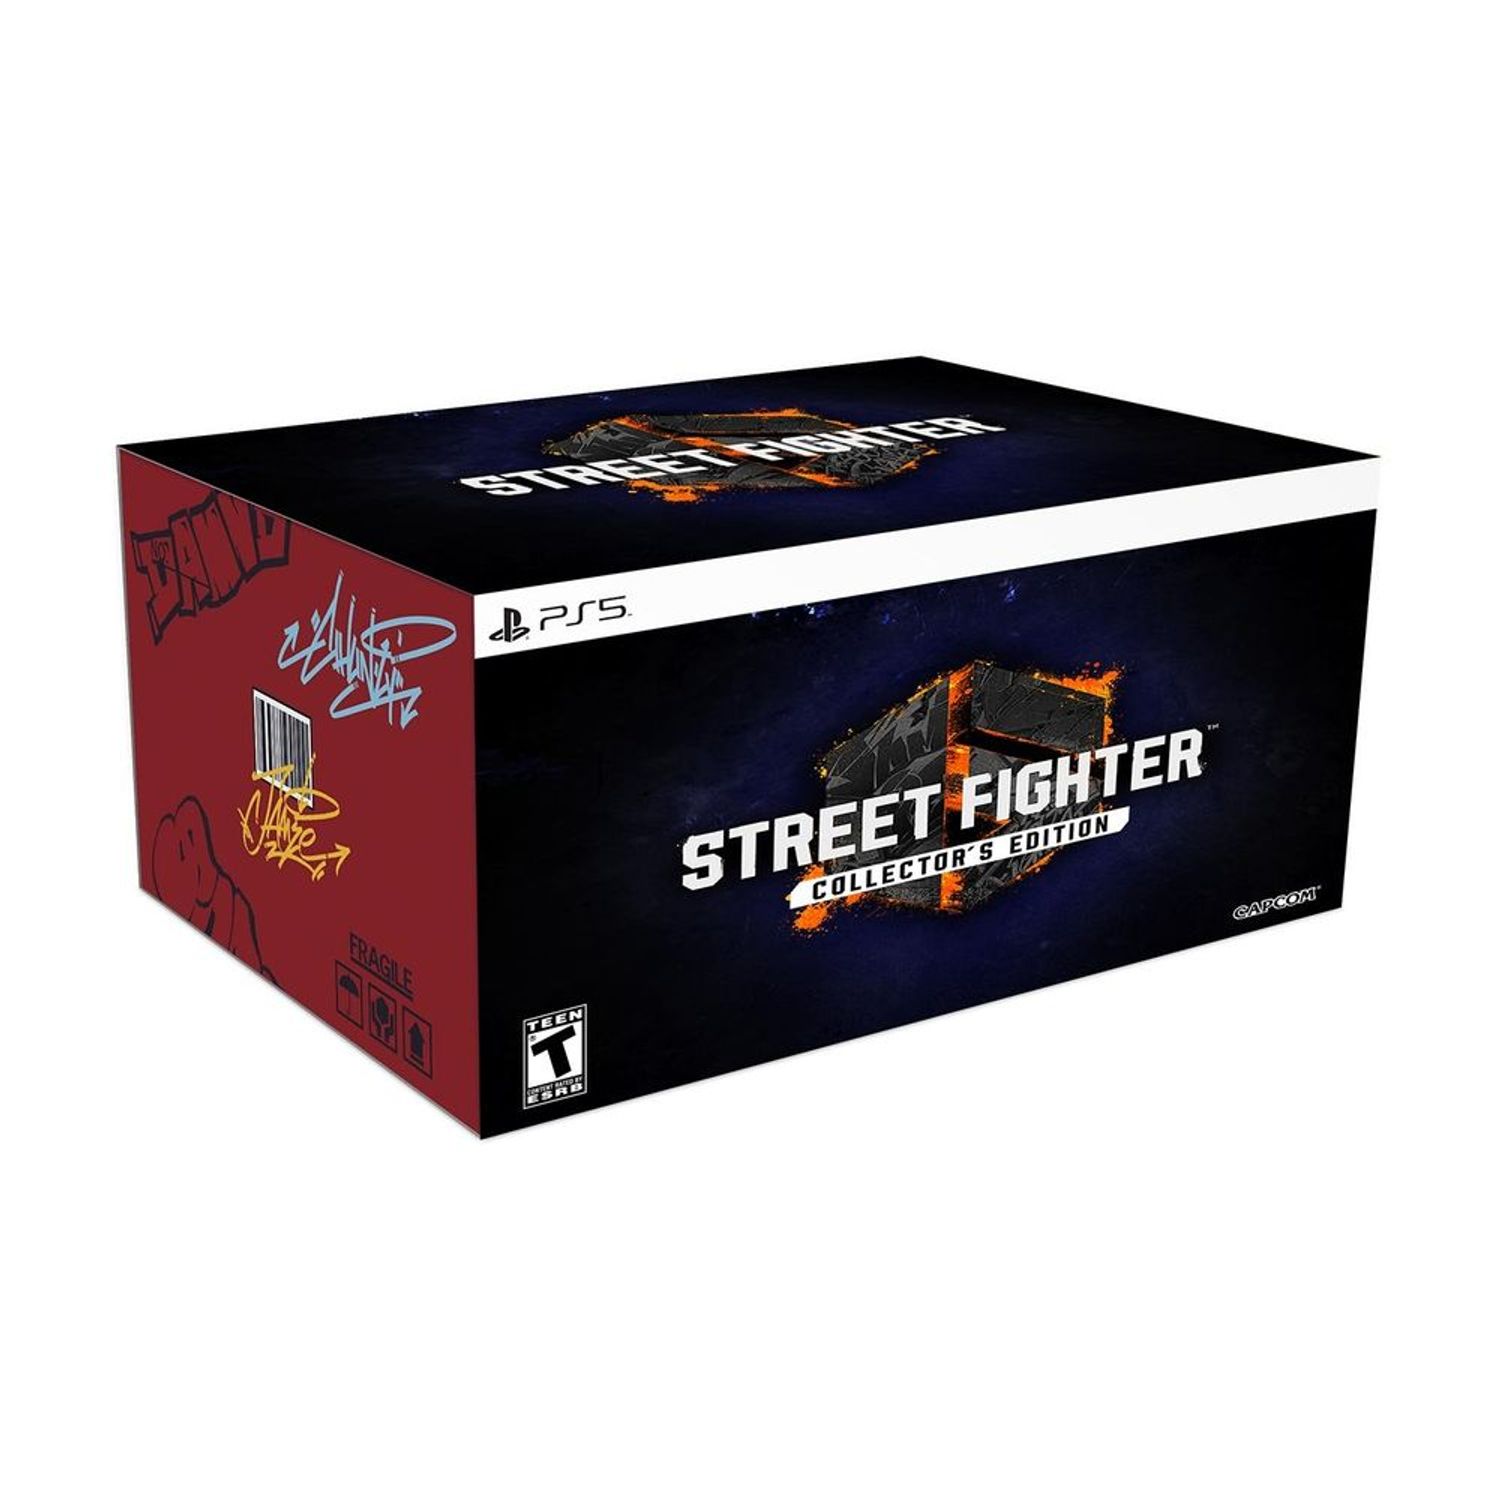 Street Fighter 6 Collector's Edition - PlayStation 5, PlayStation 5